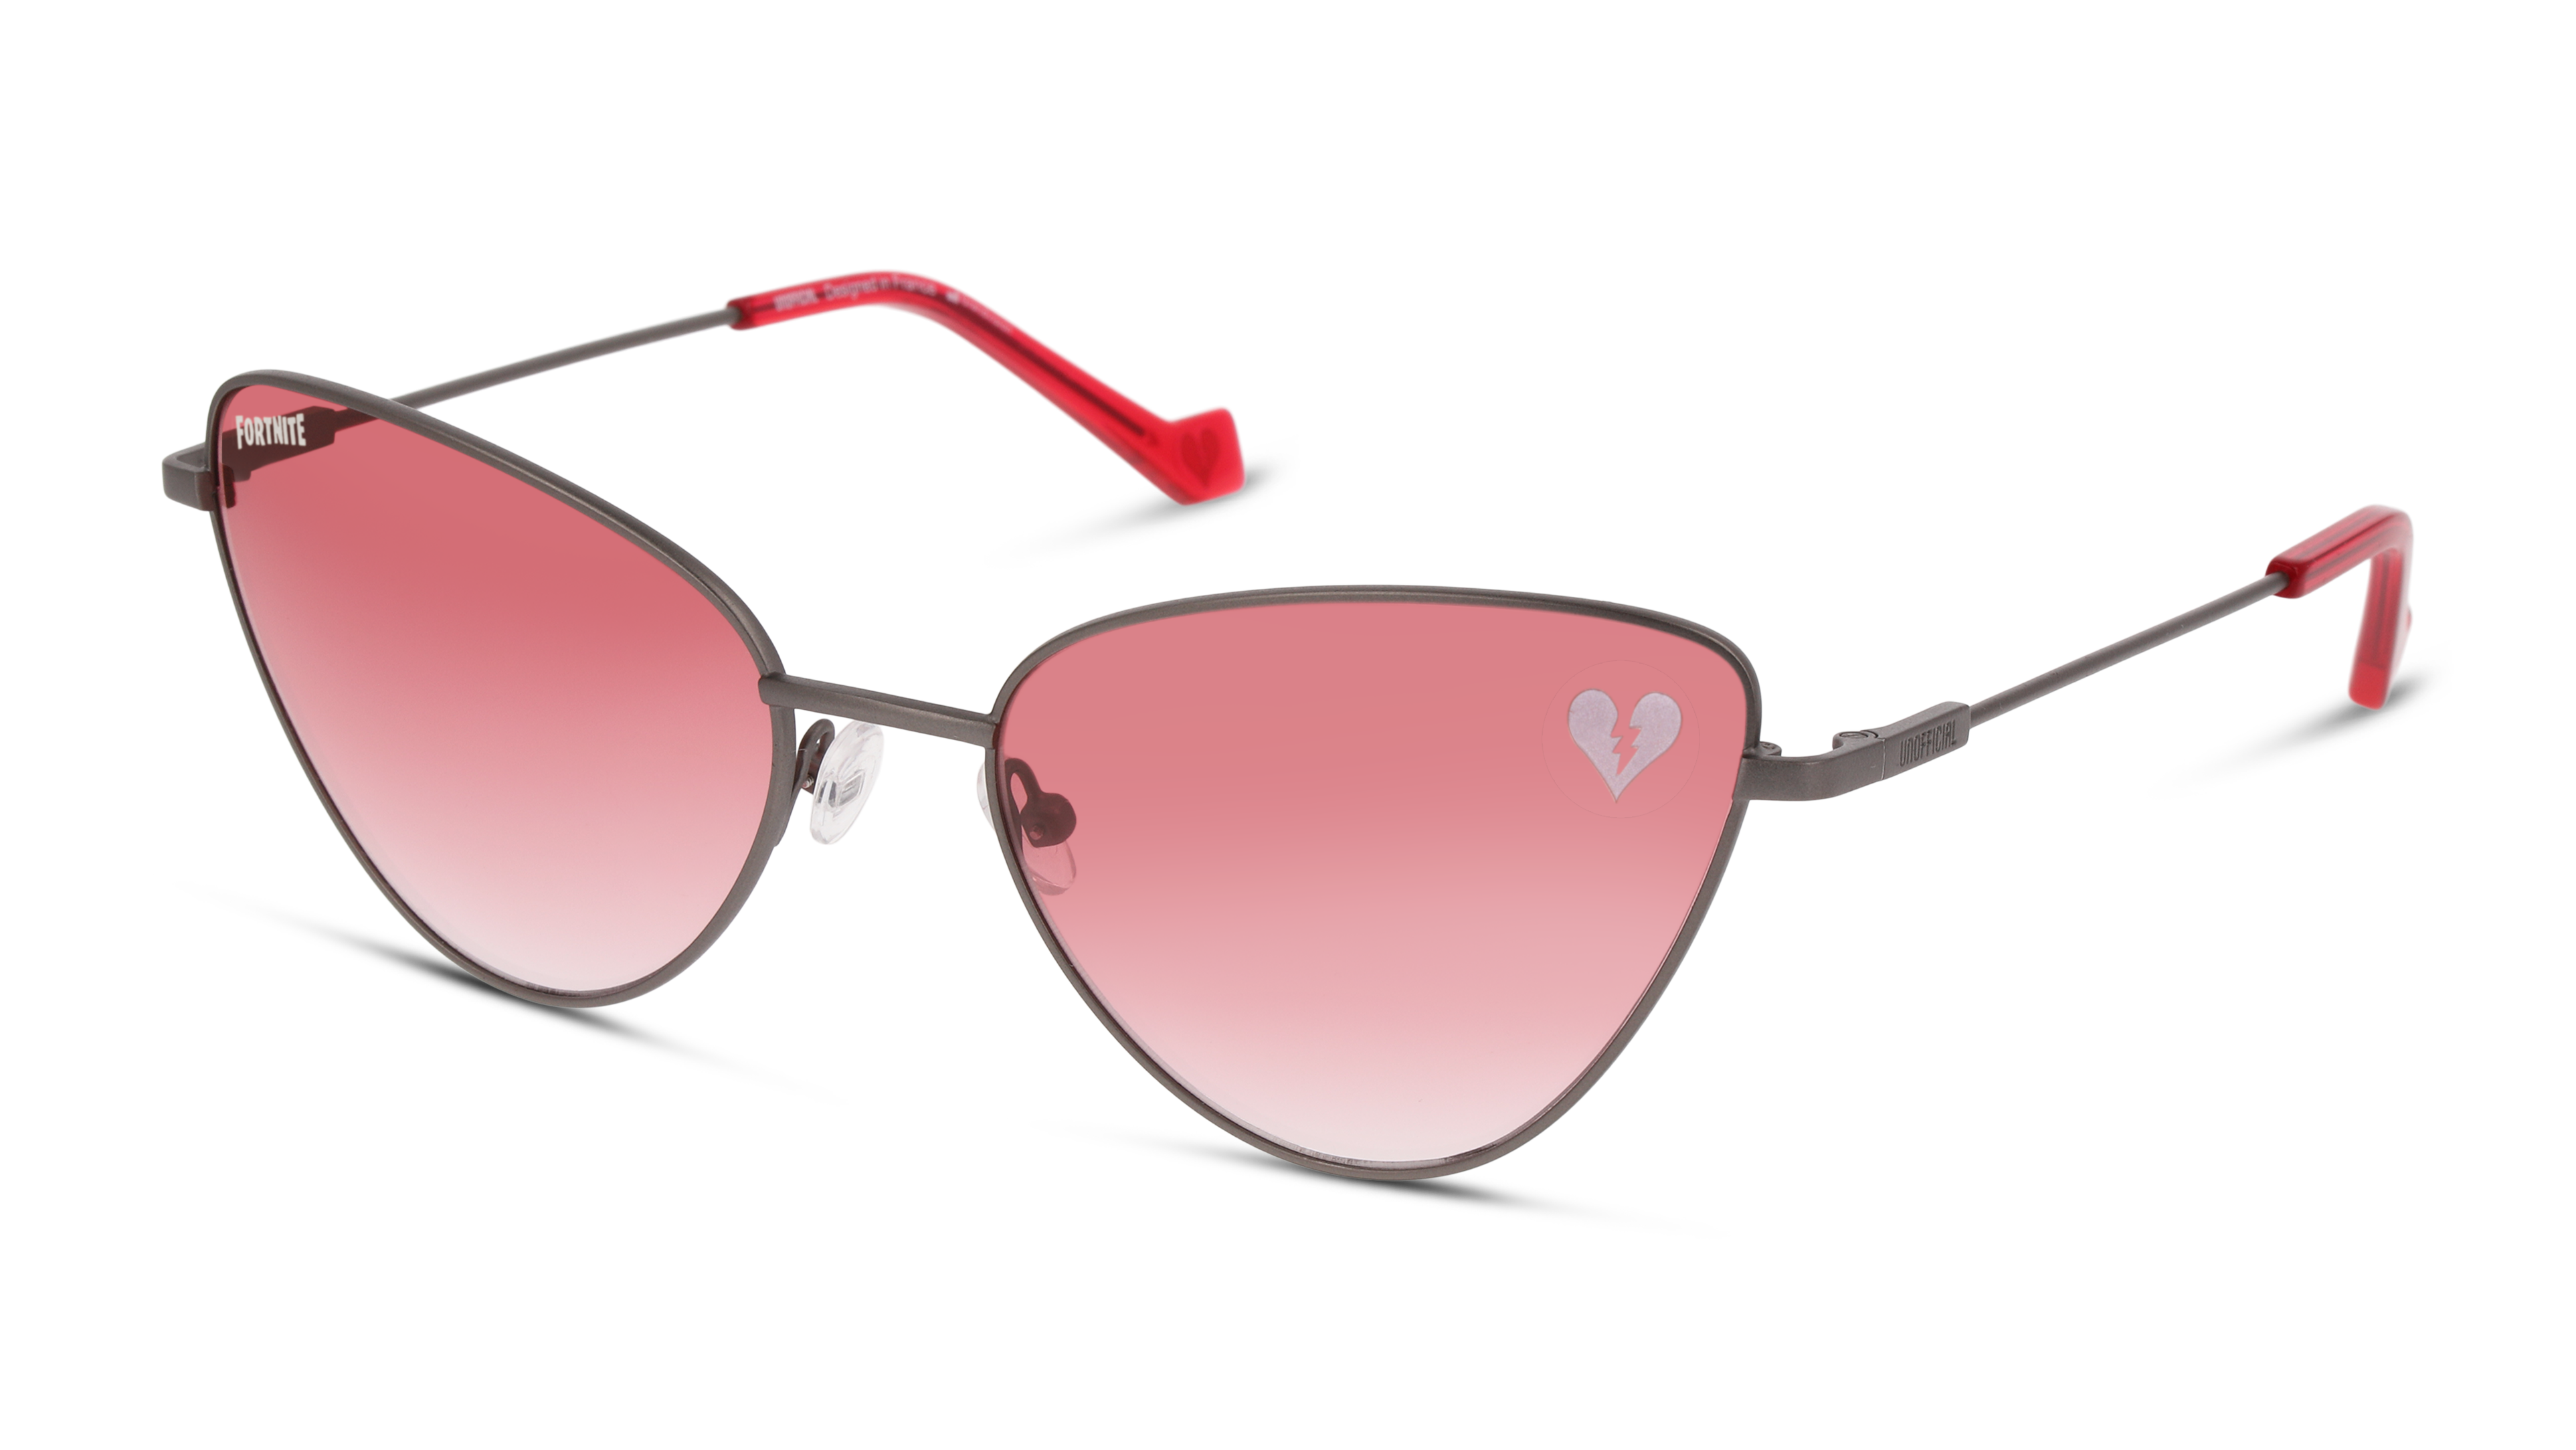 Angle_Left01 Fortnite with Unofficial UNSF0199 Sunglasses Pink / Grey